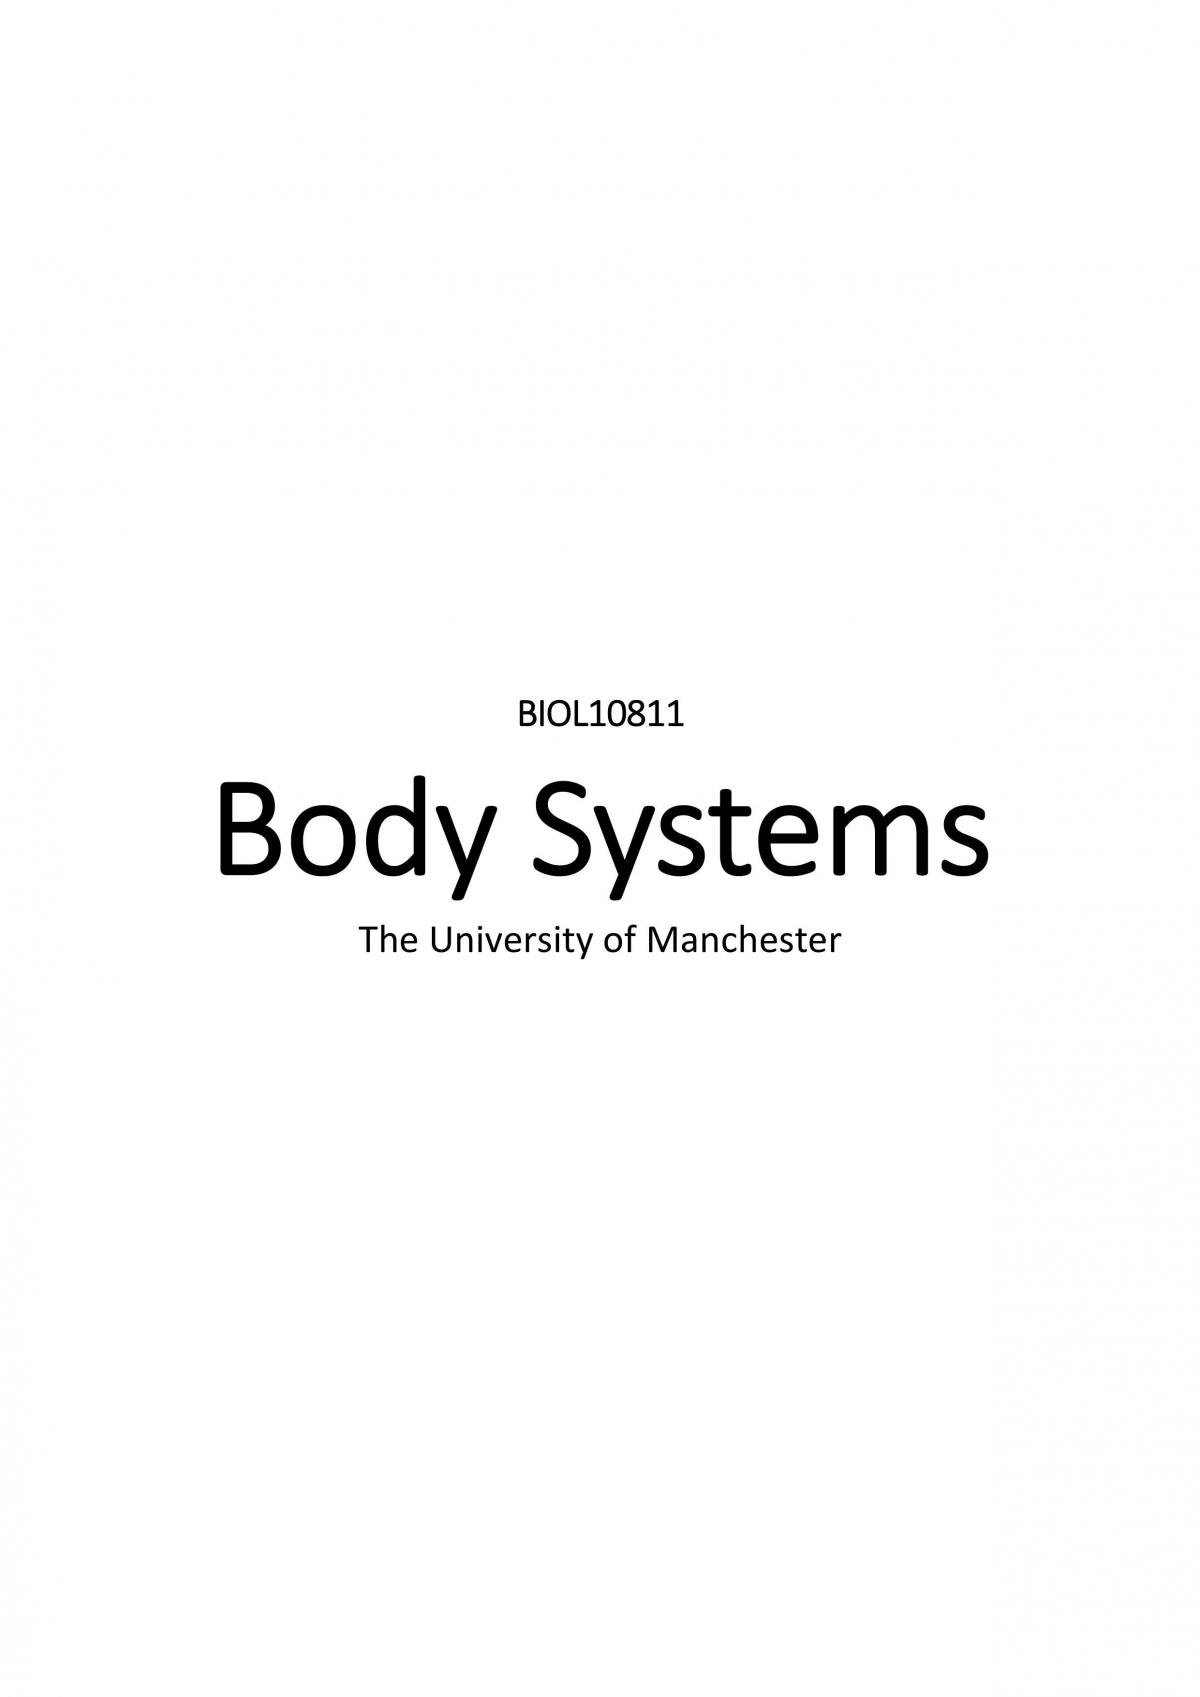 Body systems revision notes - Page 1